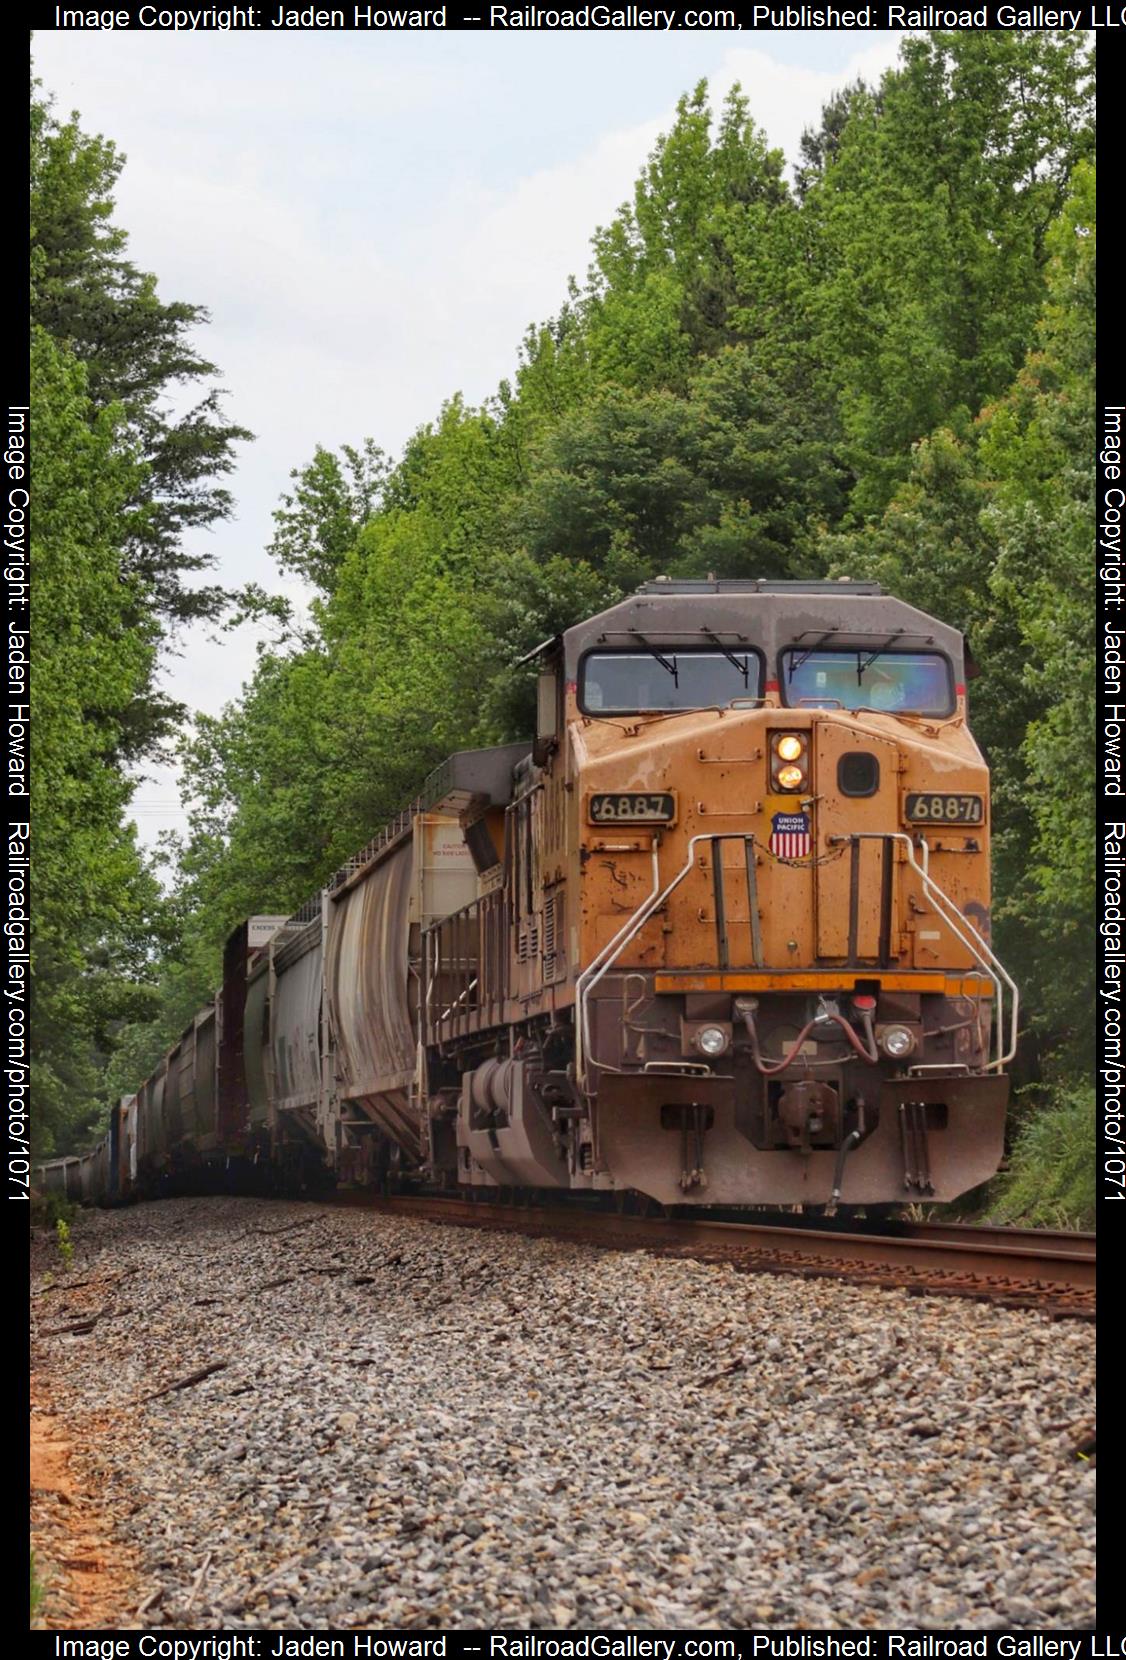 UP 6887 is a class GE AC6000CW and  is pictured in Jonesville, South Carolina , USA.  This was taken along the Columbia District/W Line on the Norfolk Southern. Photo Copyright: Jaden Howard  uploaded to Railroad Gallery on 05/15/2023. This photograph of UP 6887 was taken on Sunday, May 14, 2023. All Rights Reserved. 